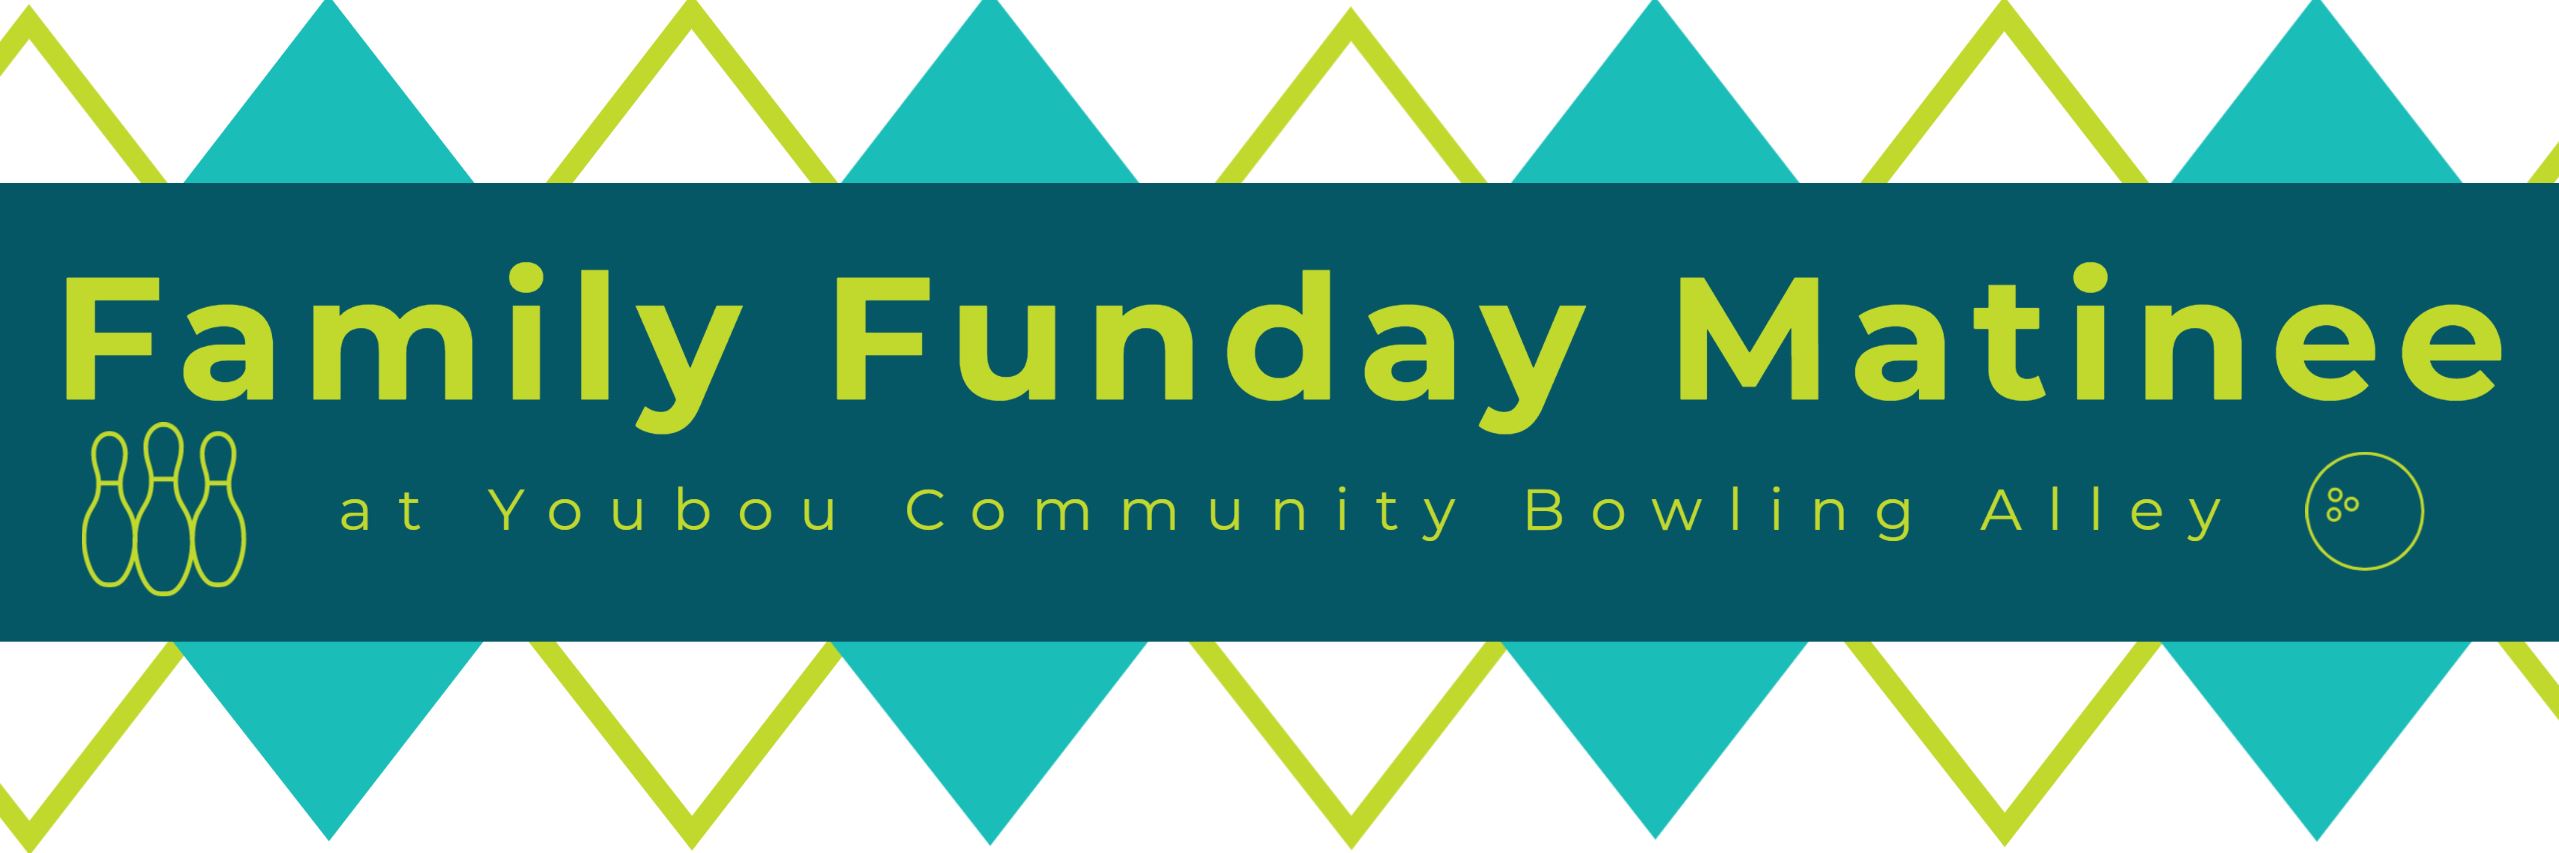 Website banner - Family Fun Bowling